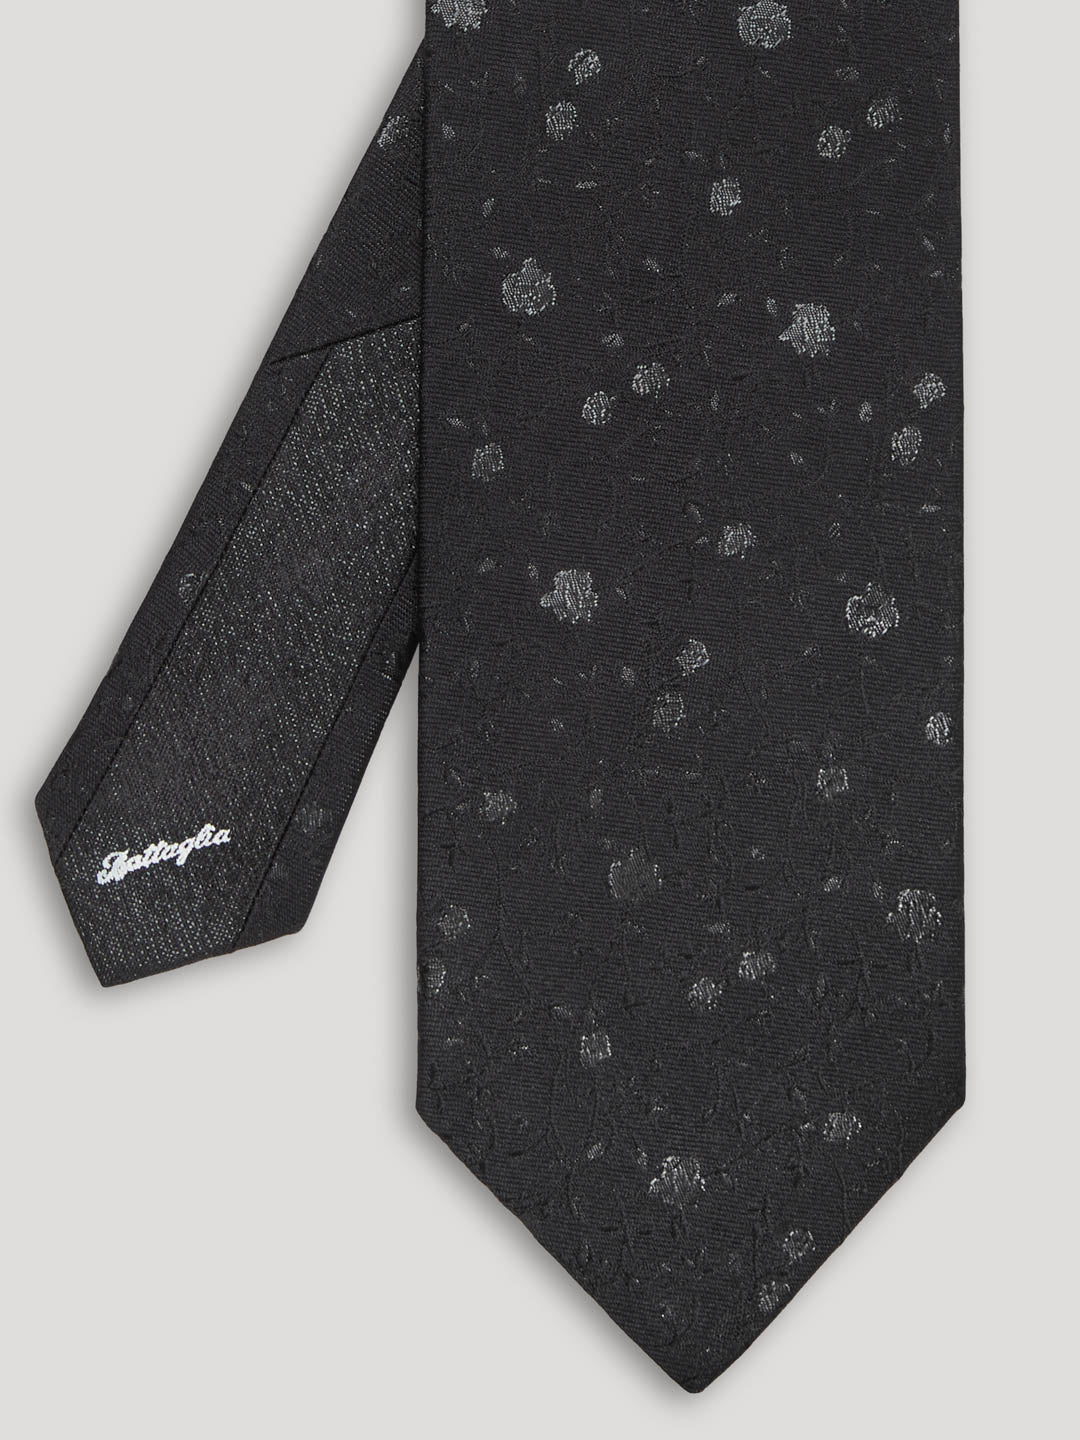 Black silk tie with silver floral details. 